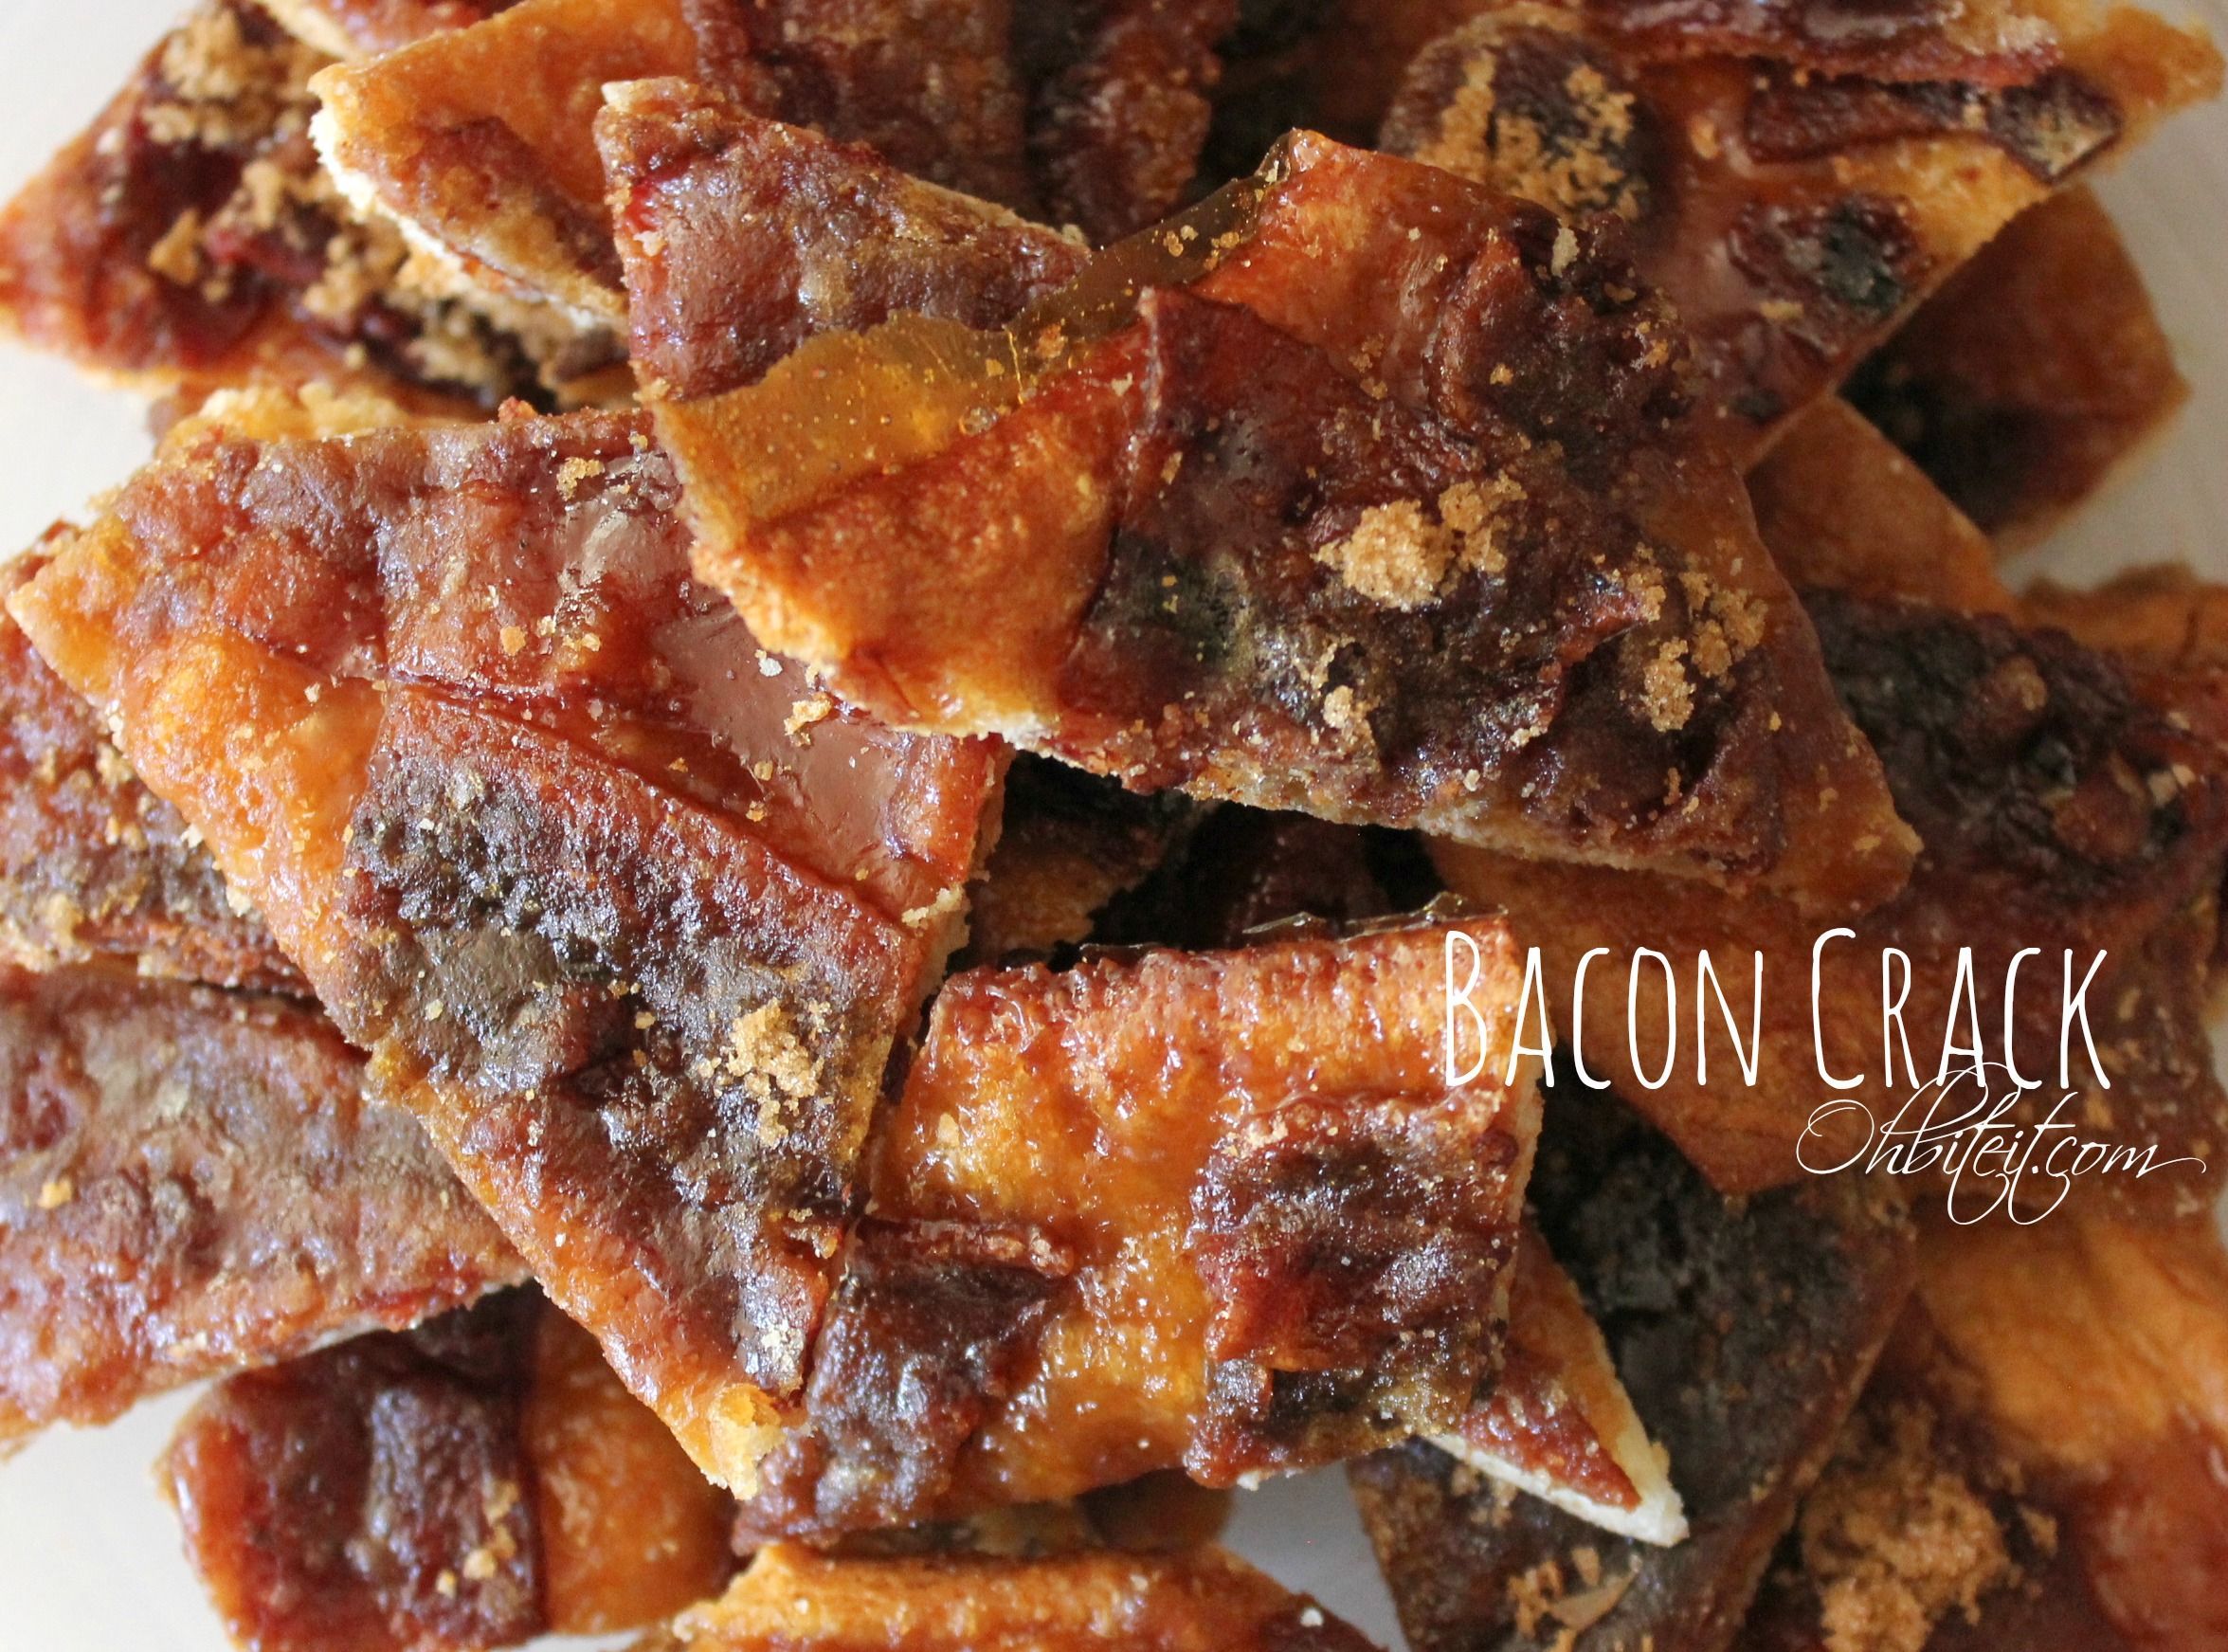 Bacon Crack! | This looks so good but yet so bad for you. But gotta try for next party.